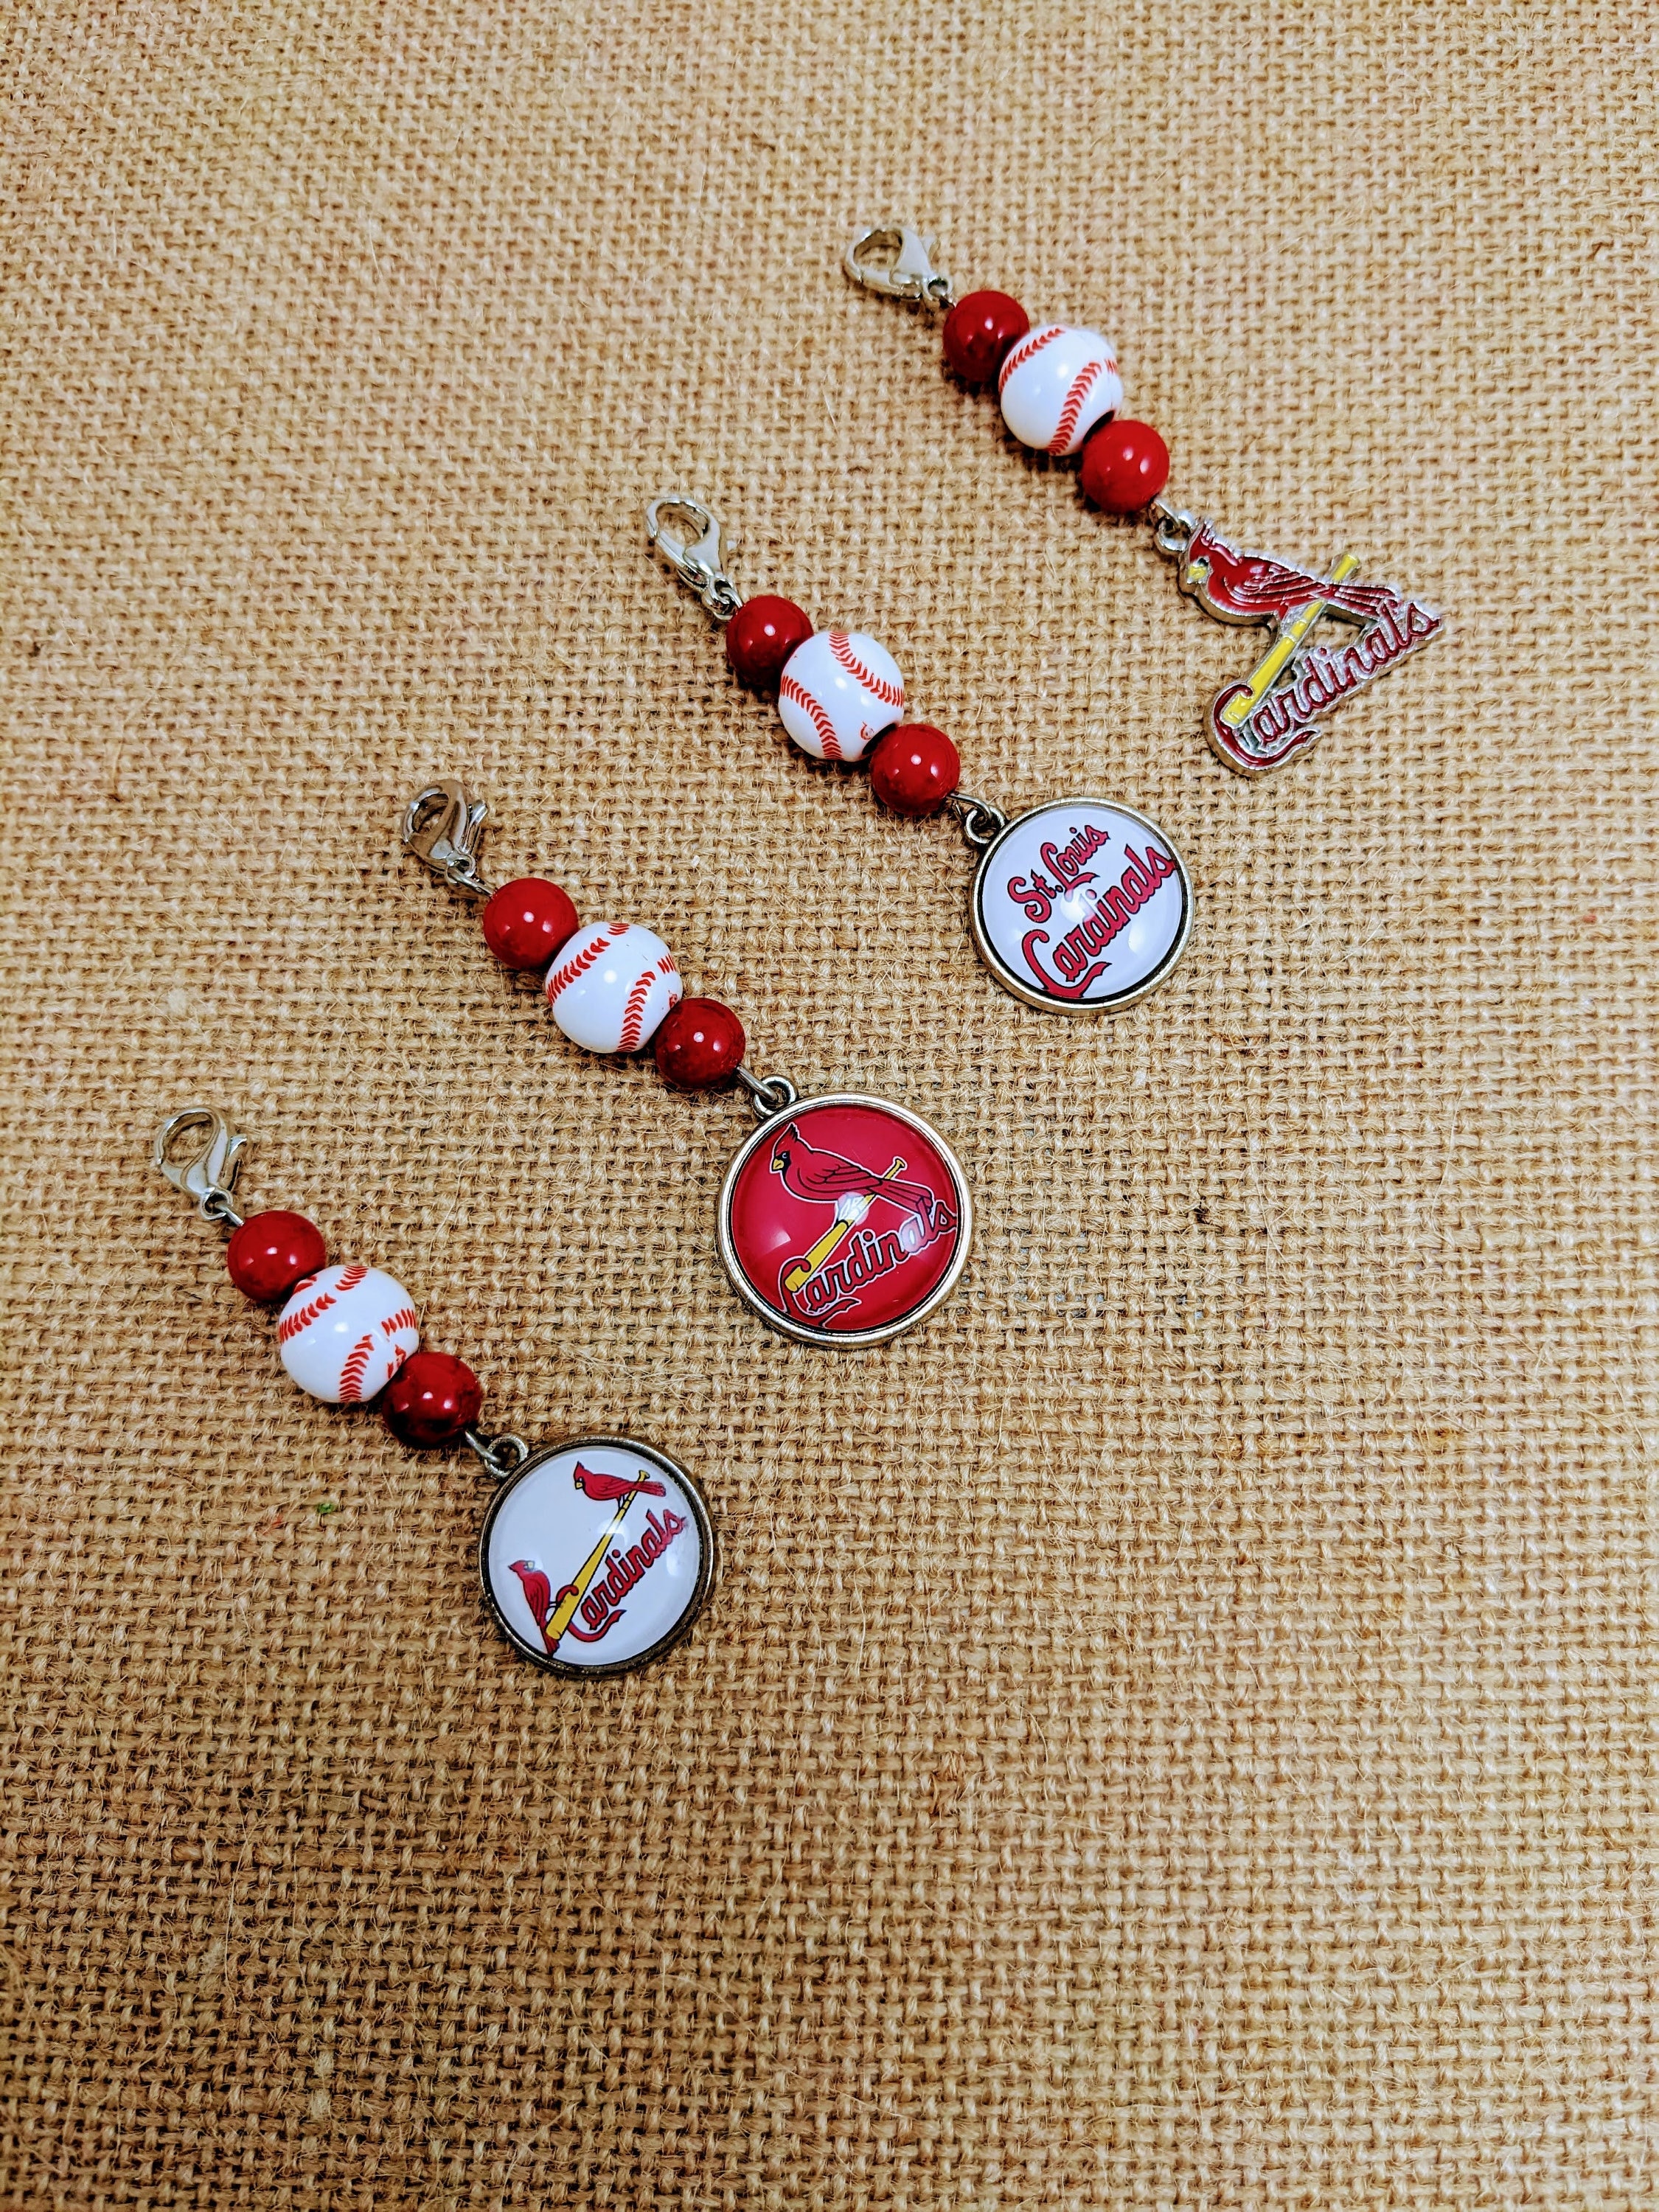 University of Louisville Cardinal Charm Sports Charms and 